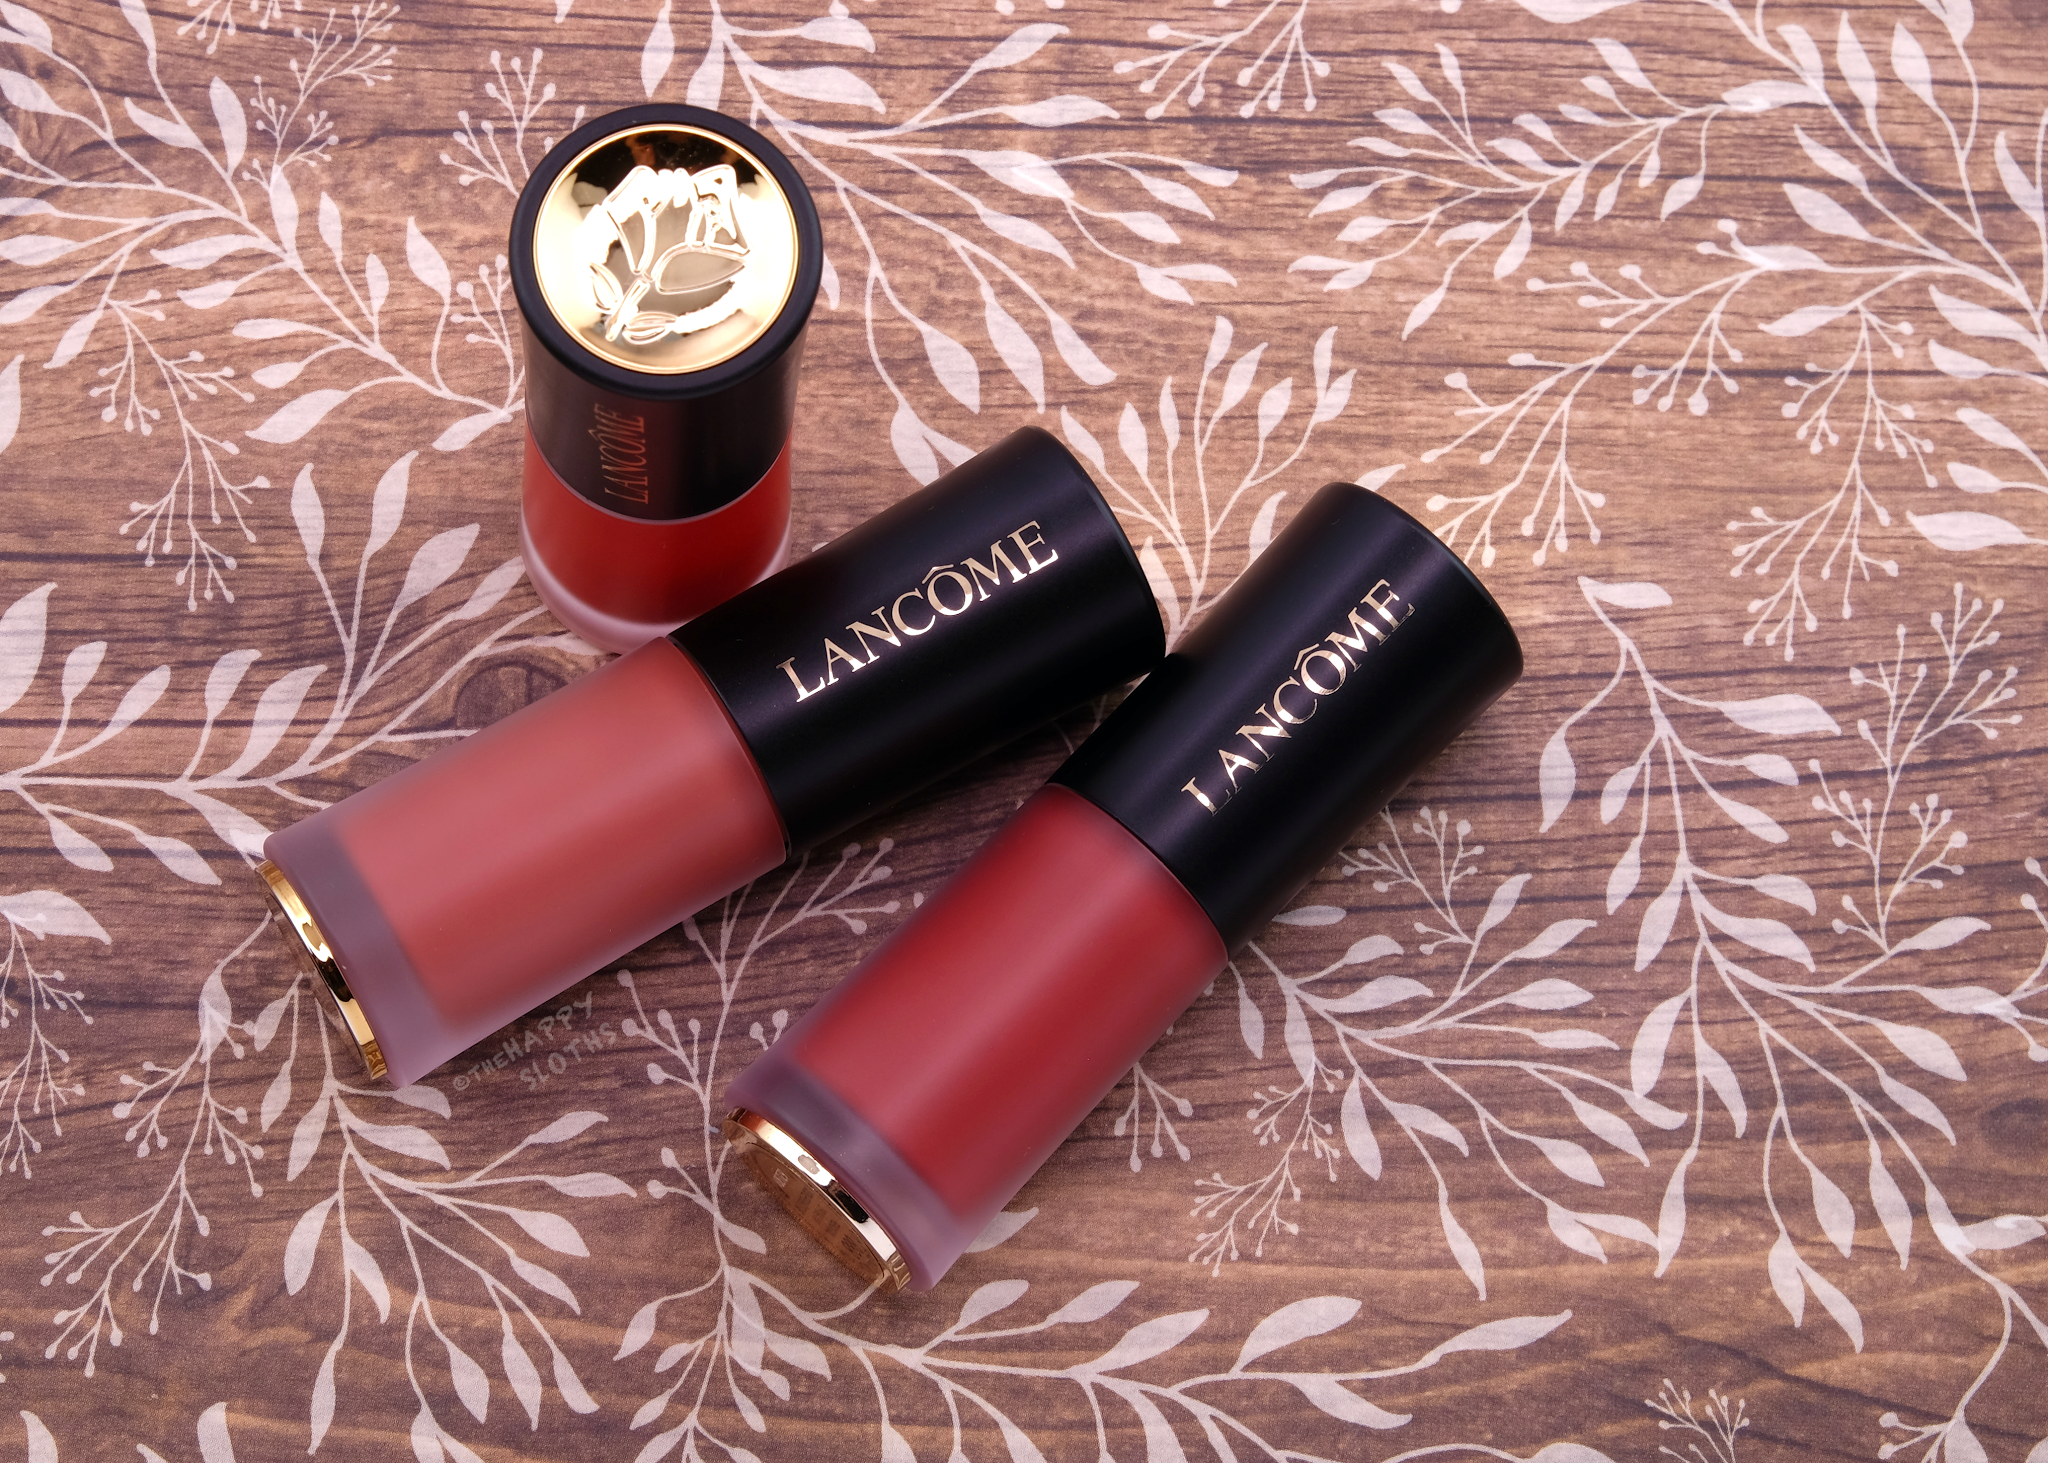 Lancôme | L'Absolu Rouge Drama Ink: Review and Swatches